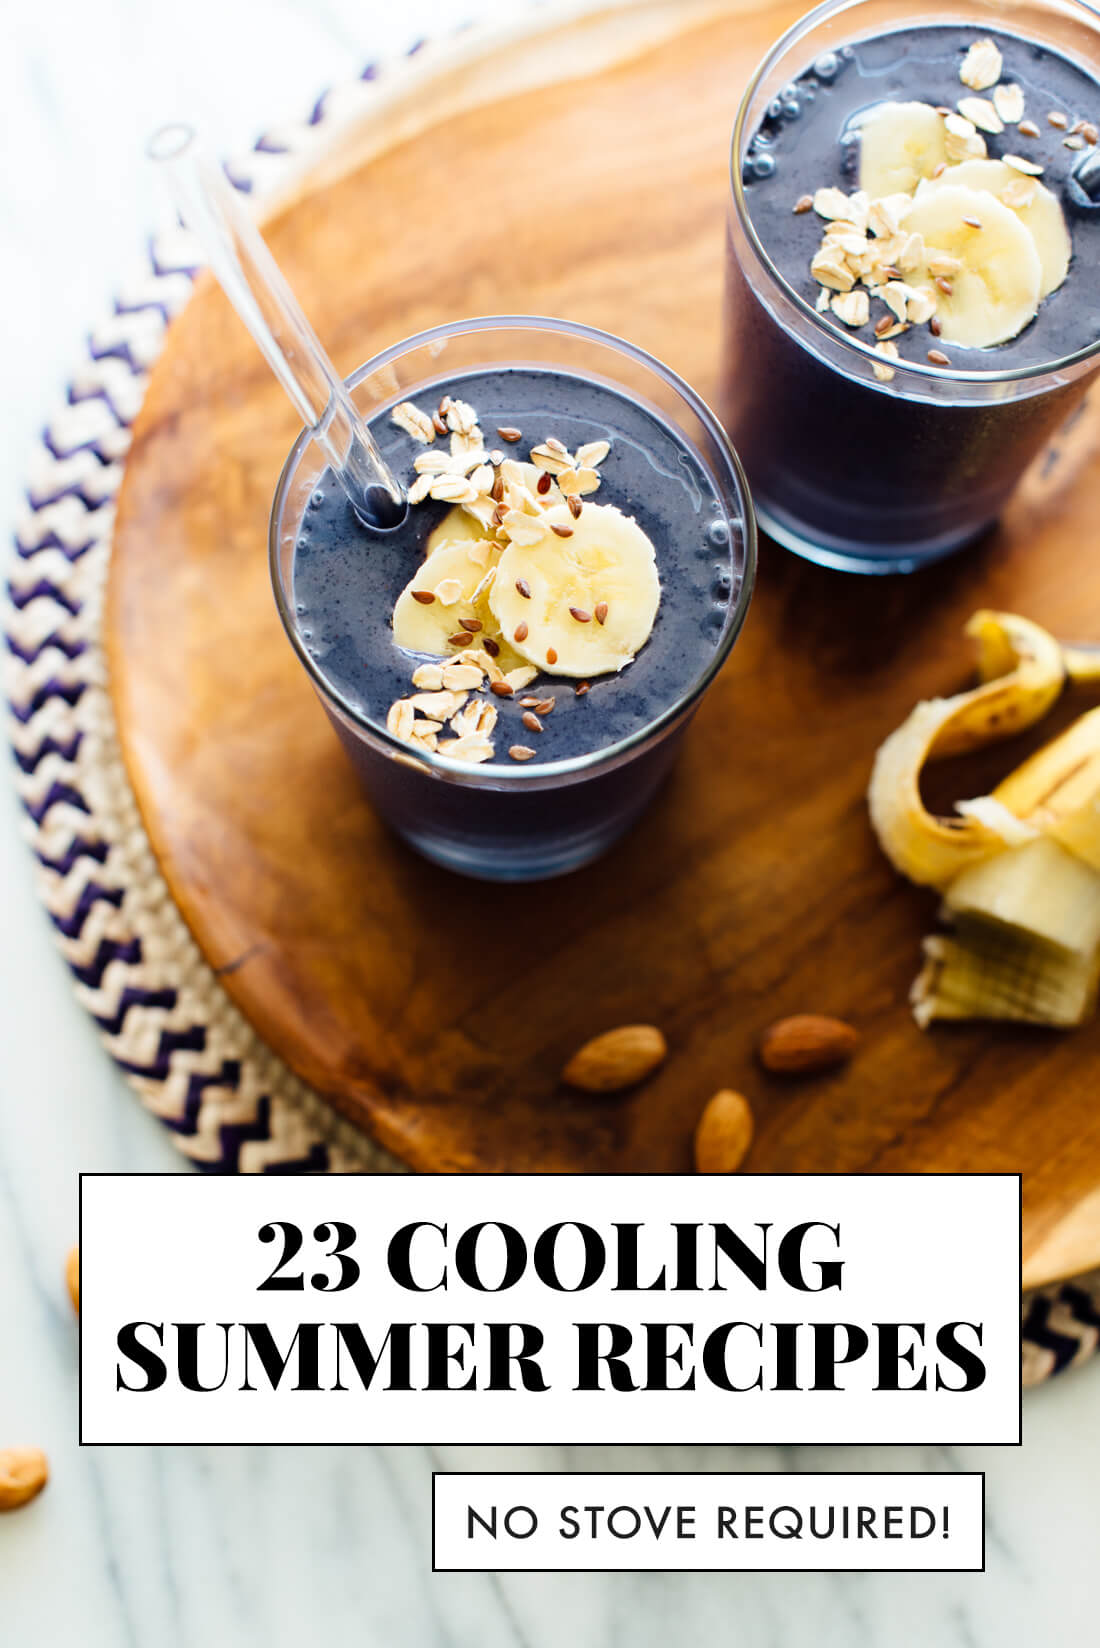 23 cool summer recipes (no stove required)